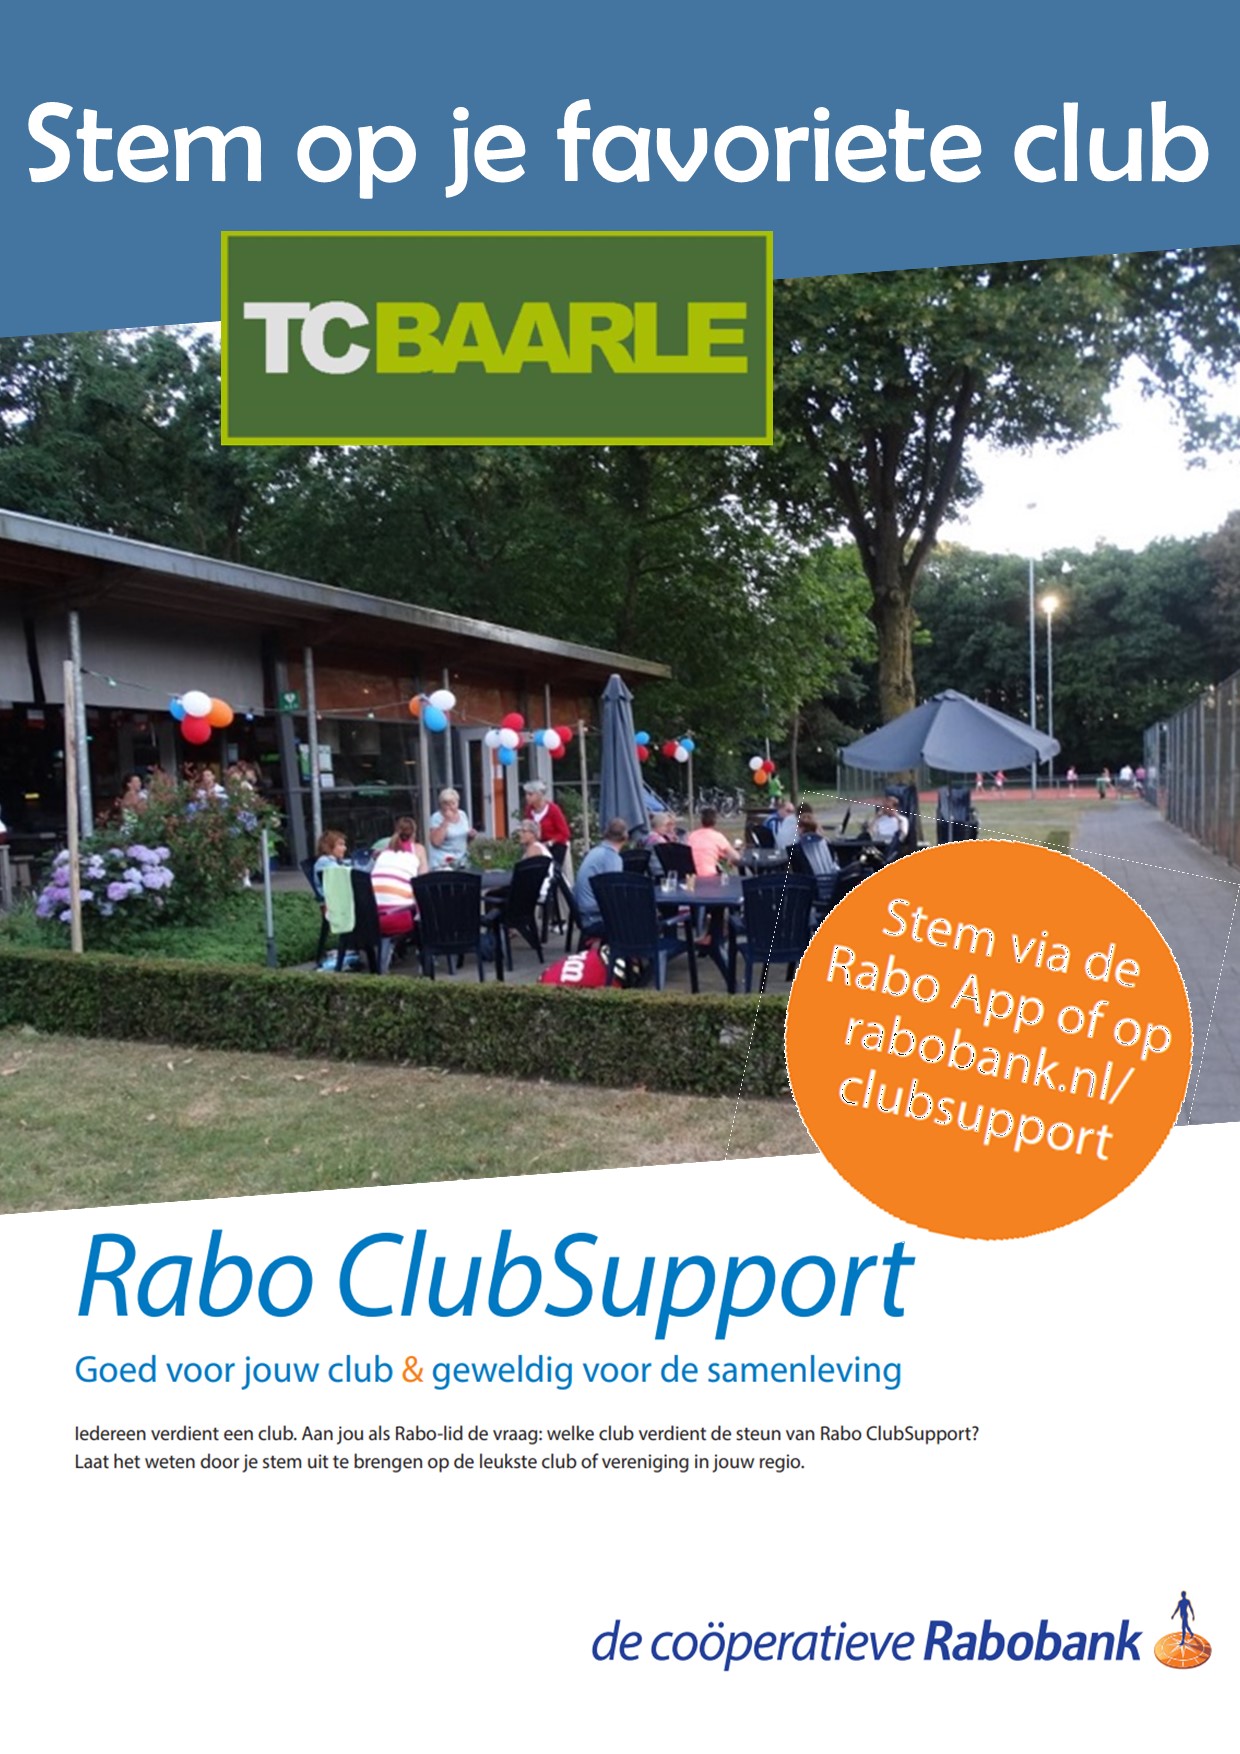 Rabo club support